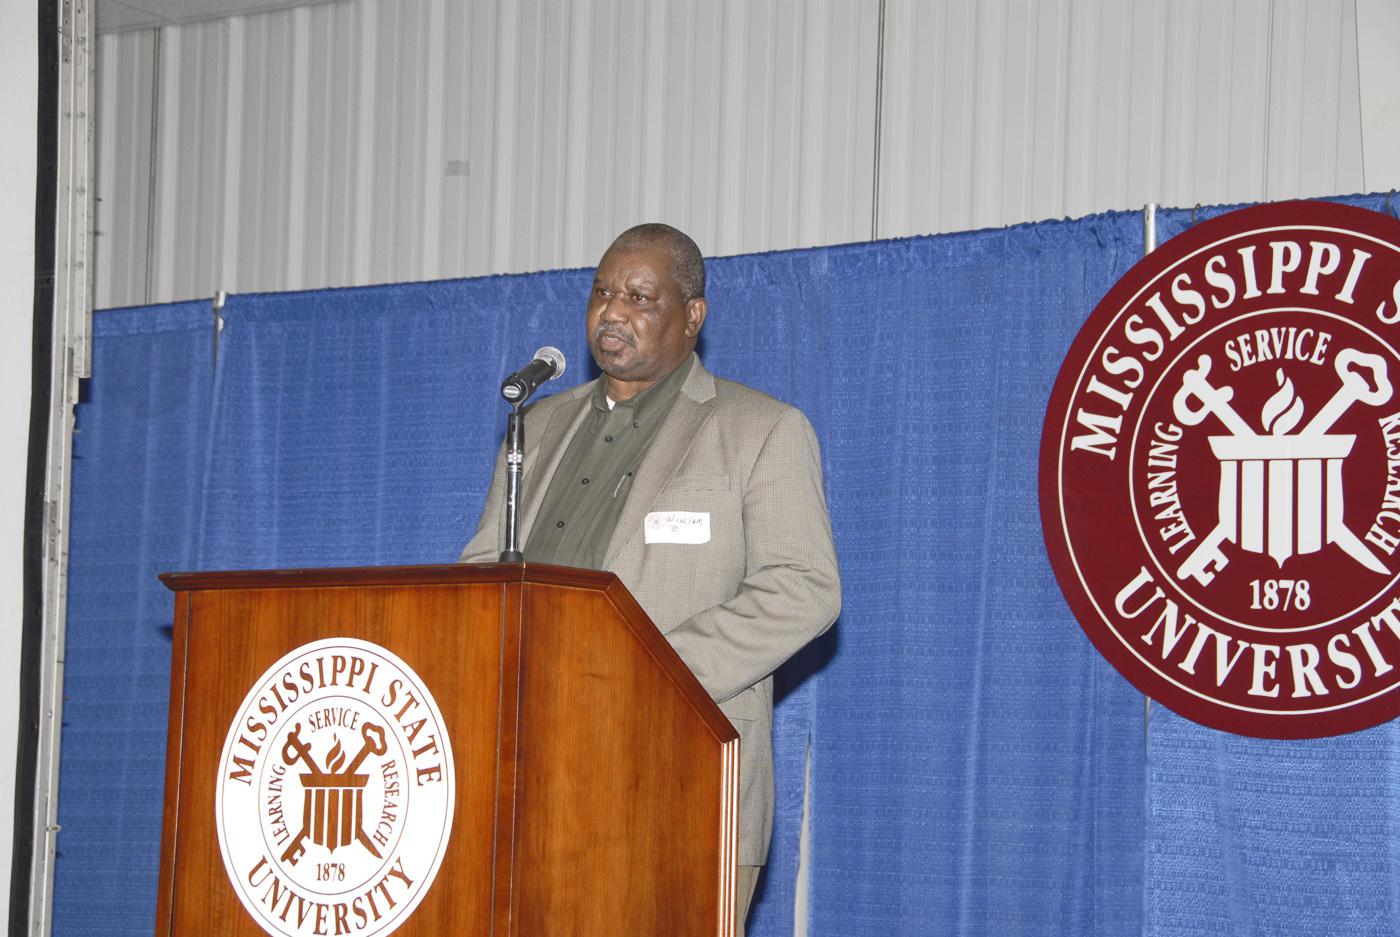 William Oliver, producer chair for the grain crops group, presented research and education needs to MSU personnel. A primary interest of the group is to learn more about controlling fire ants.